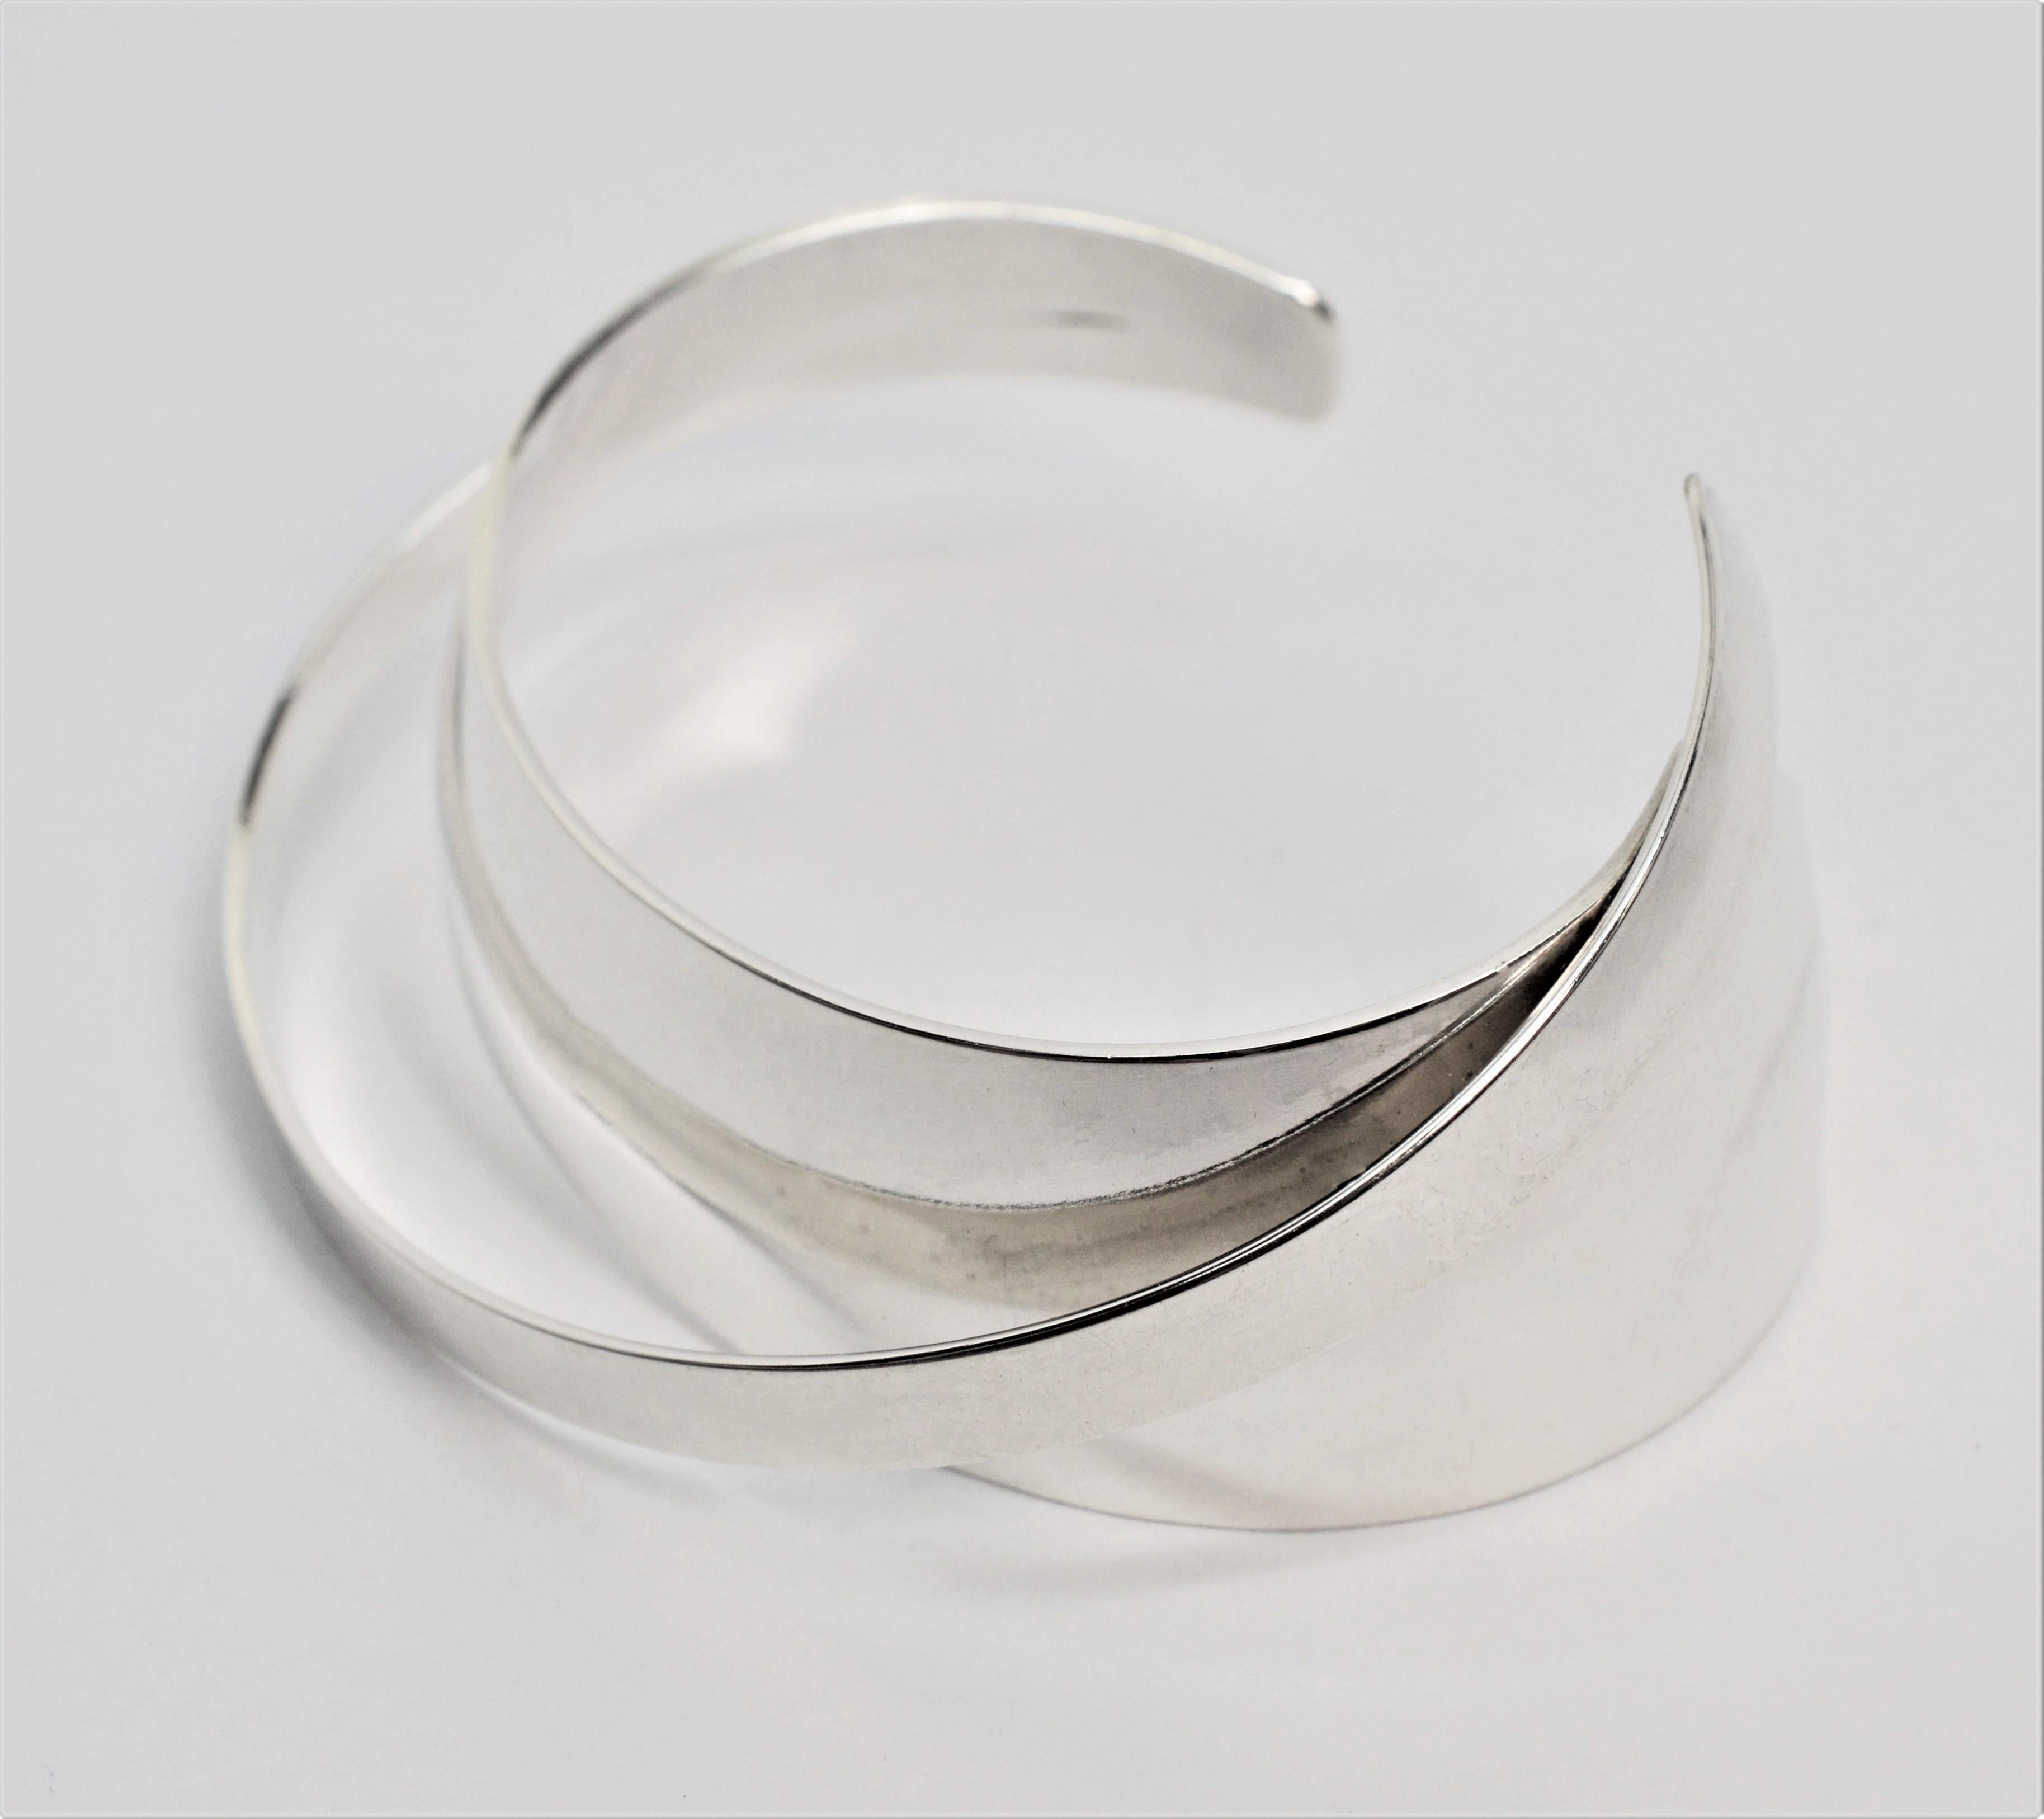 Abstract Sterling Silver Cuff Bracelet 11